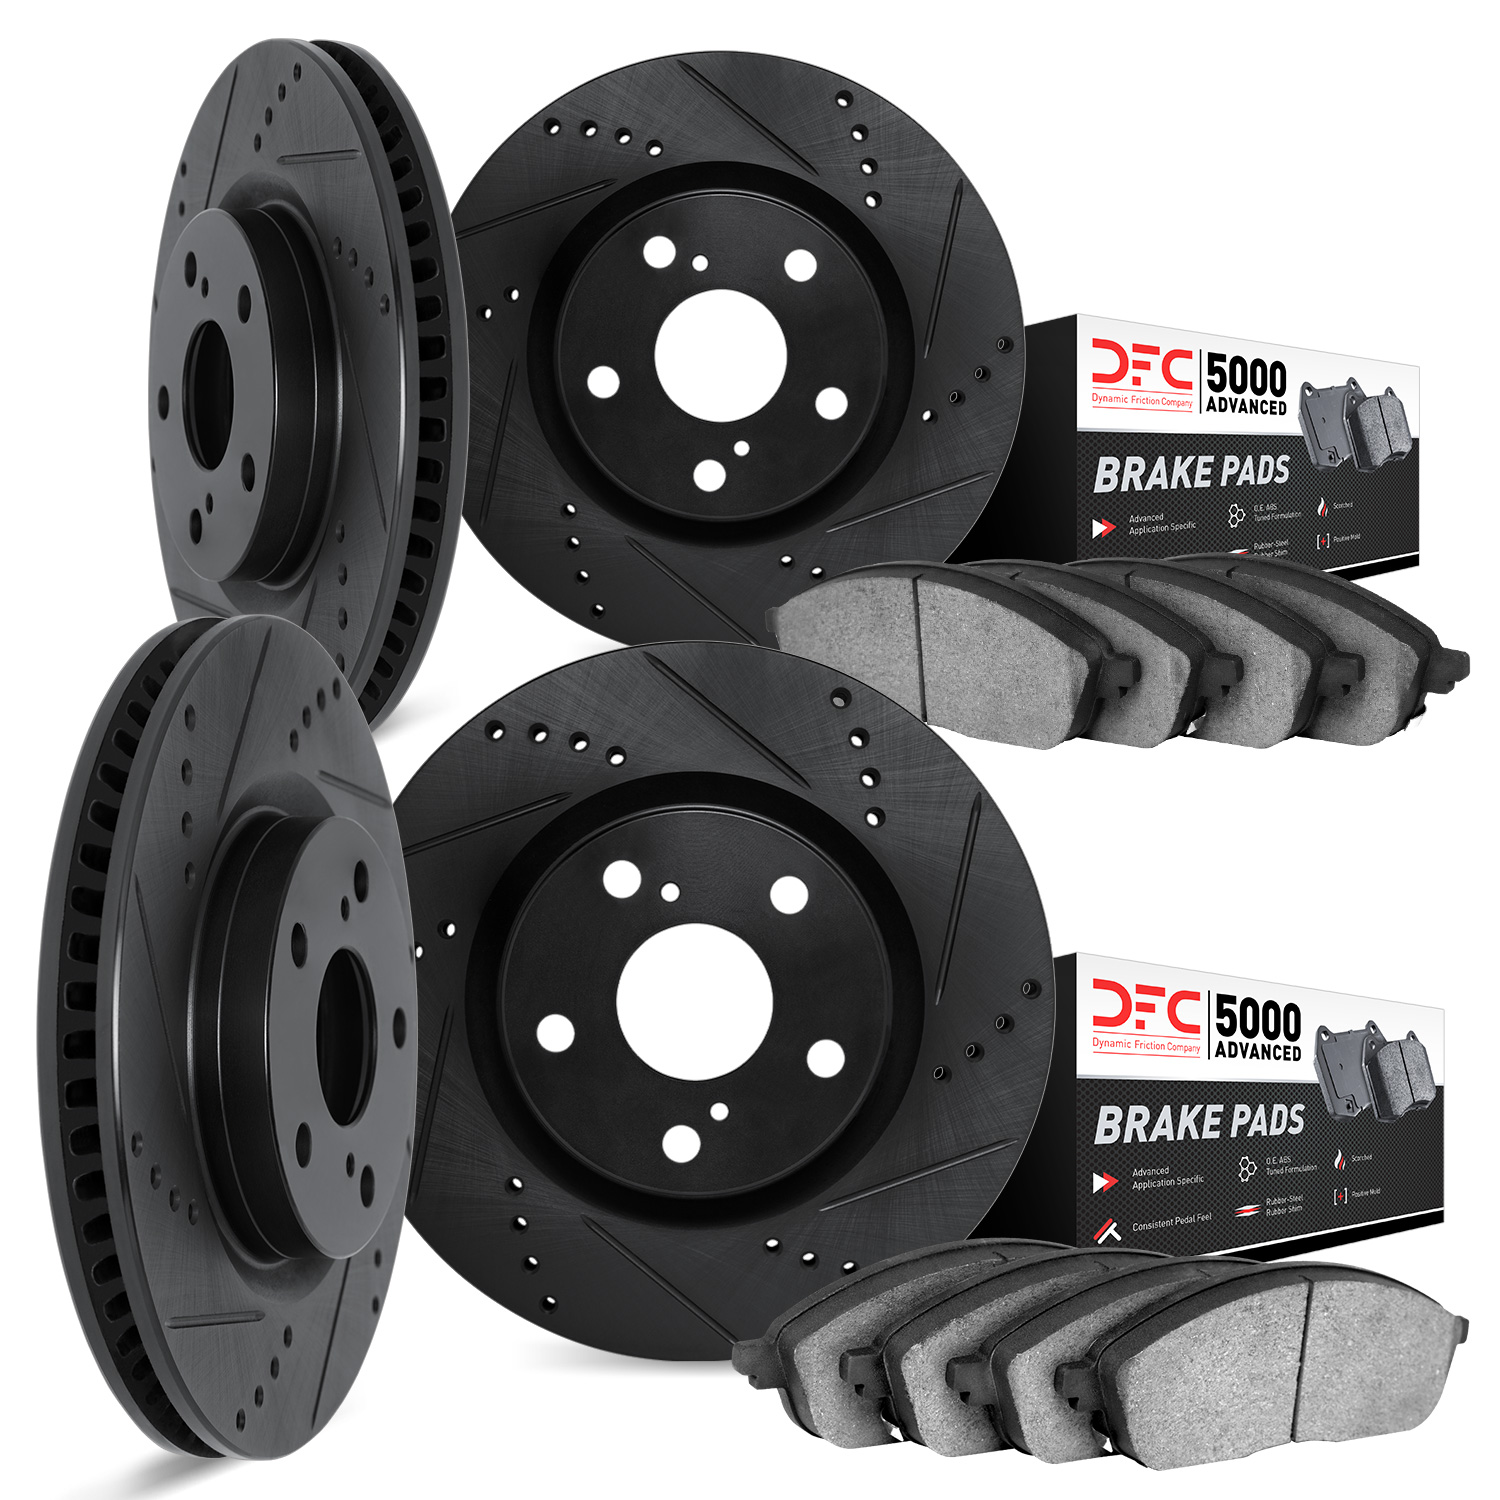 8504-16002 Drilled/Slotted Brake Rotors w/5000 Advanced Brake Pads Kit [Black], 2017-2021 Alfa Romeo, Position: Front and Rear